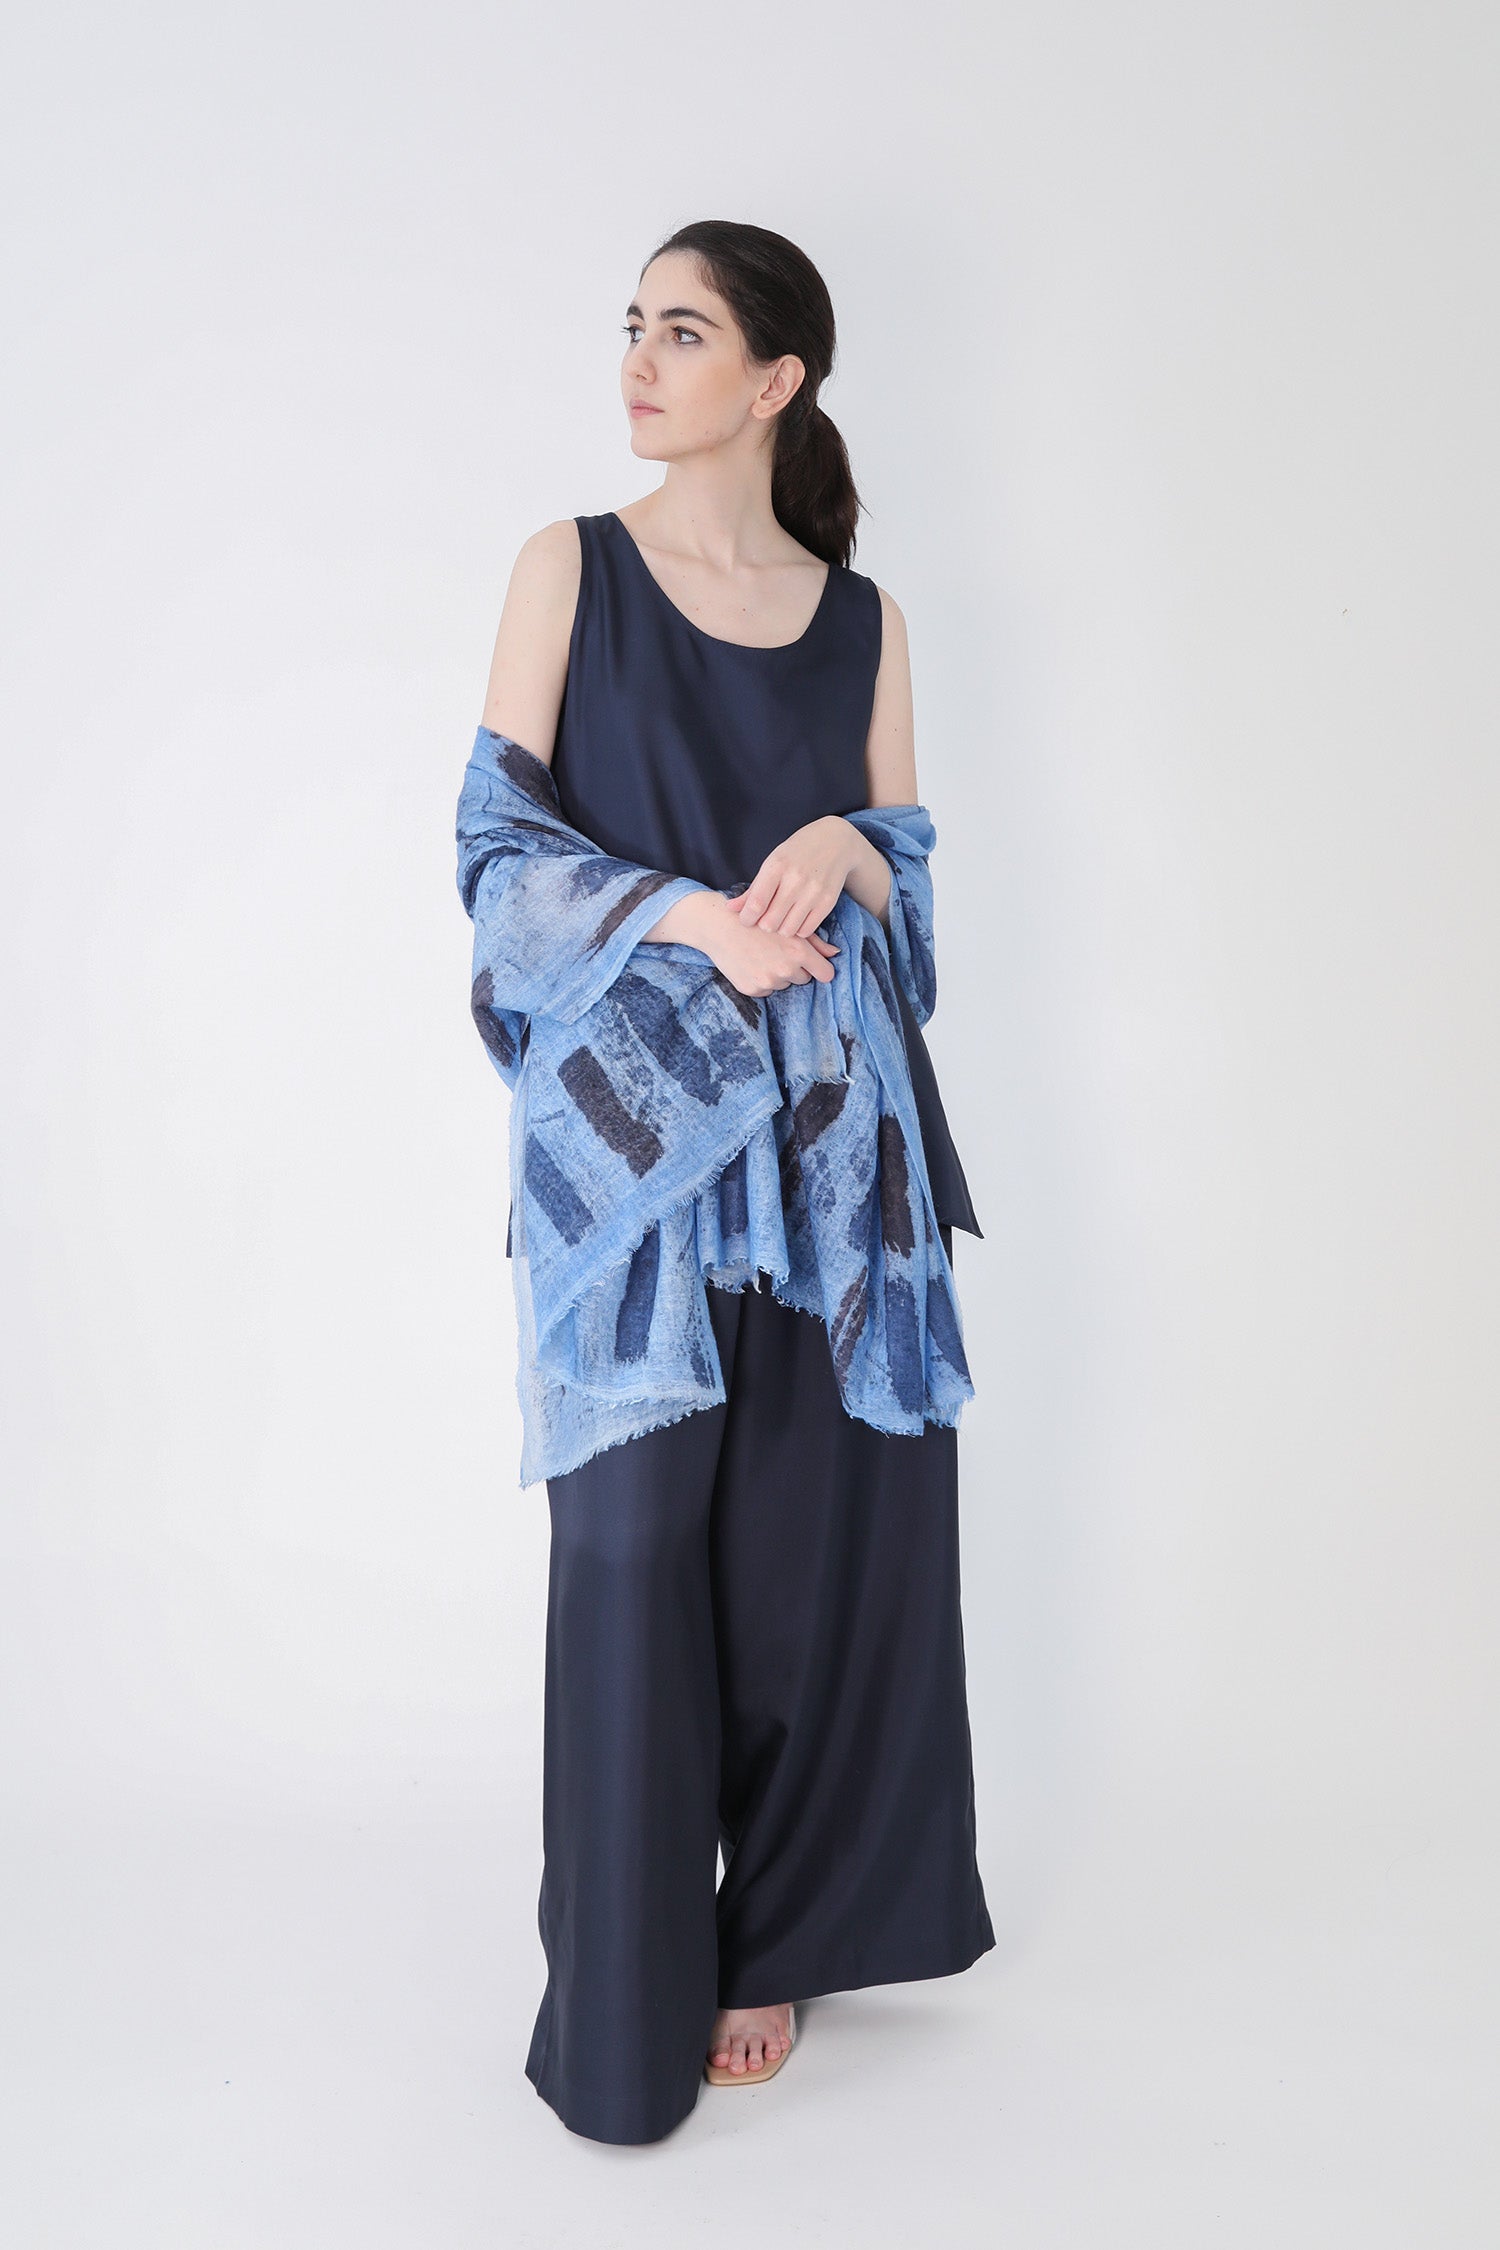 NORDIC BLUE SCARF IN HAND DYED CASHMERE